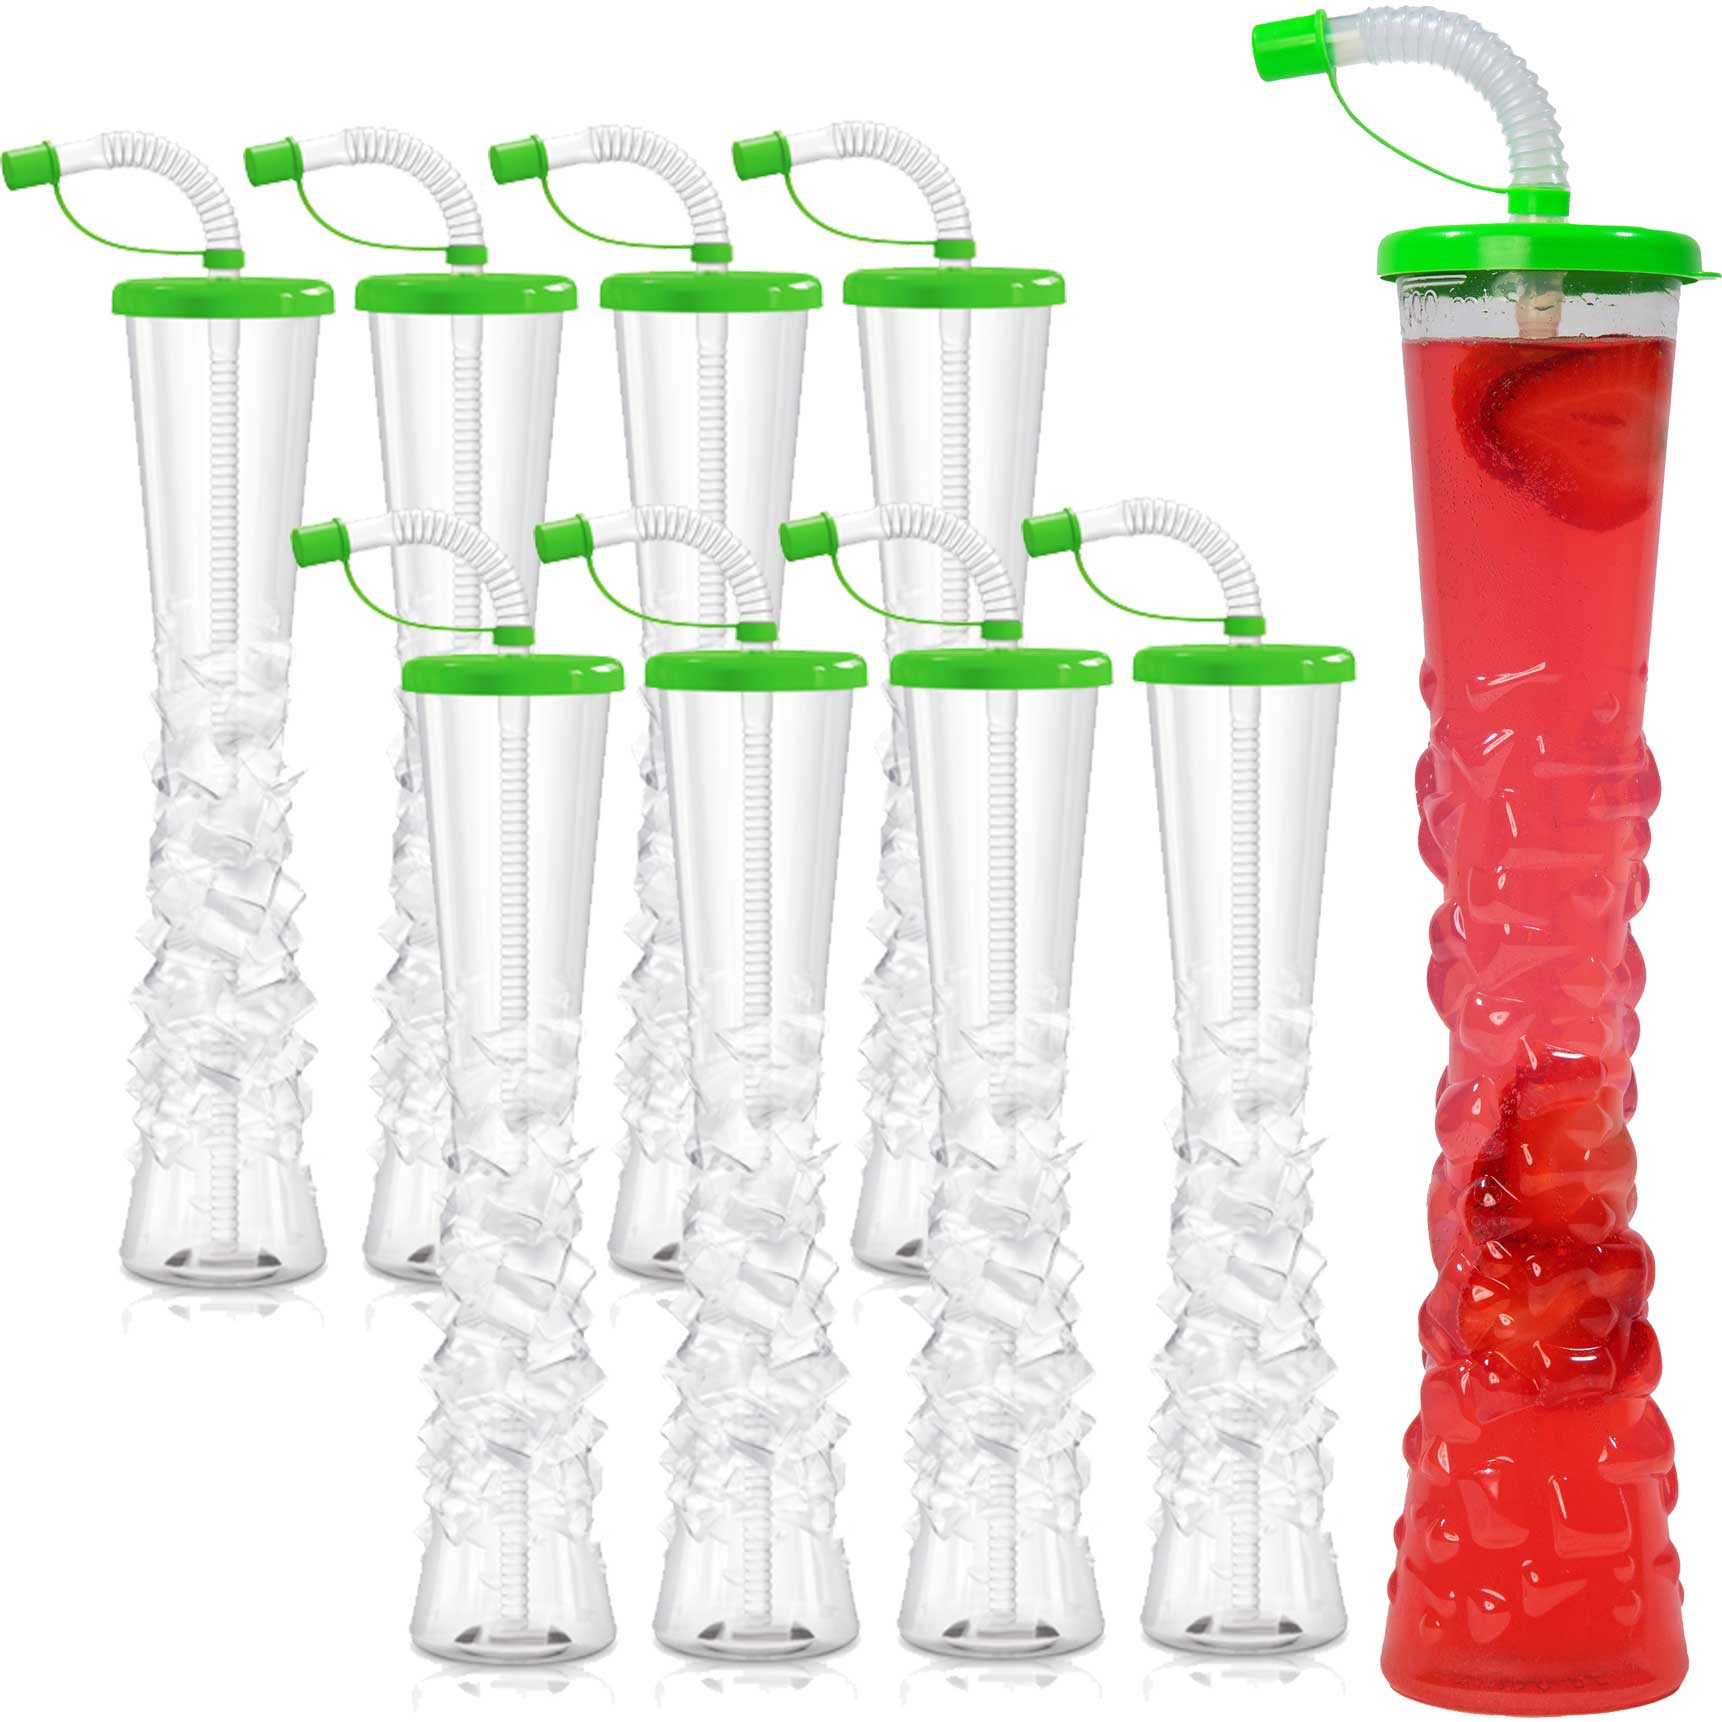 Ice Yard Cups (54 Cups - Lime) - for Margaritas and Frozen Drinks Kids Parties - 17oz. (500ml)